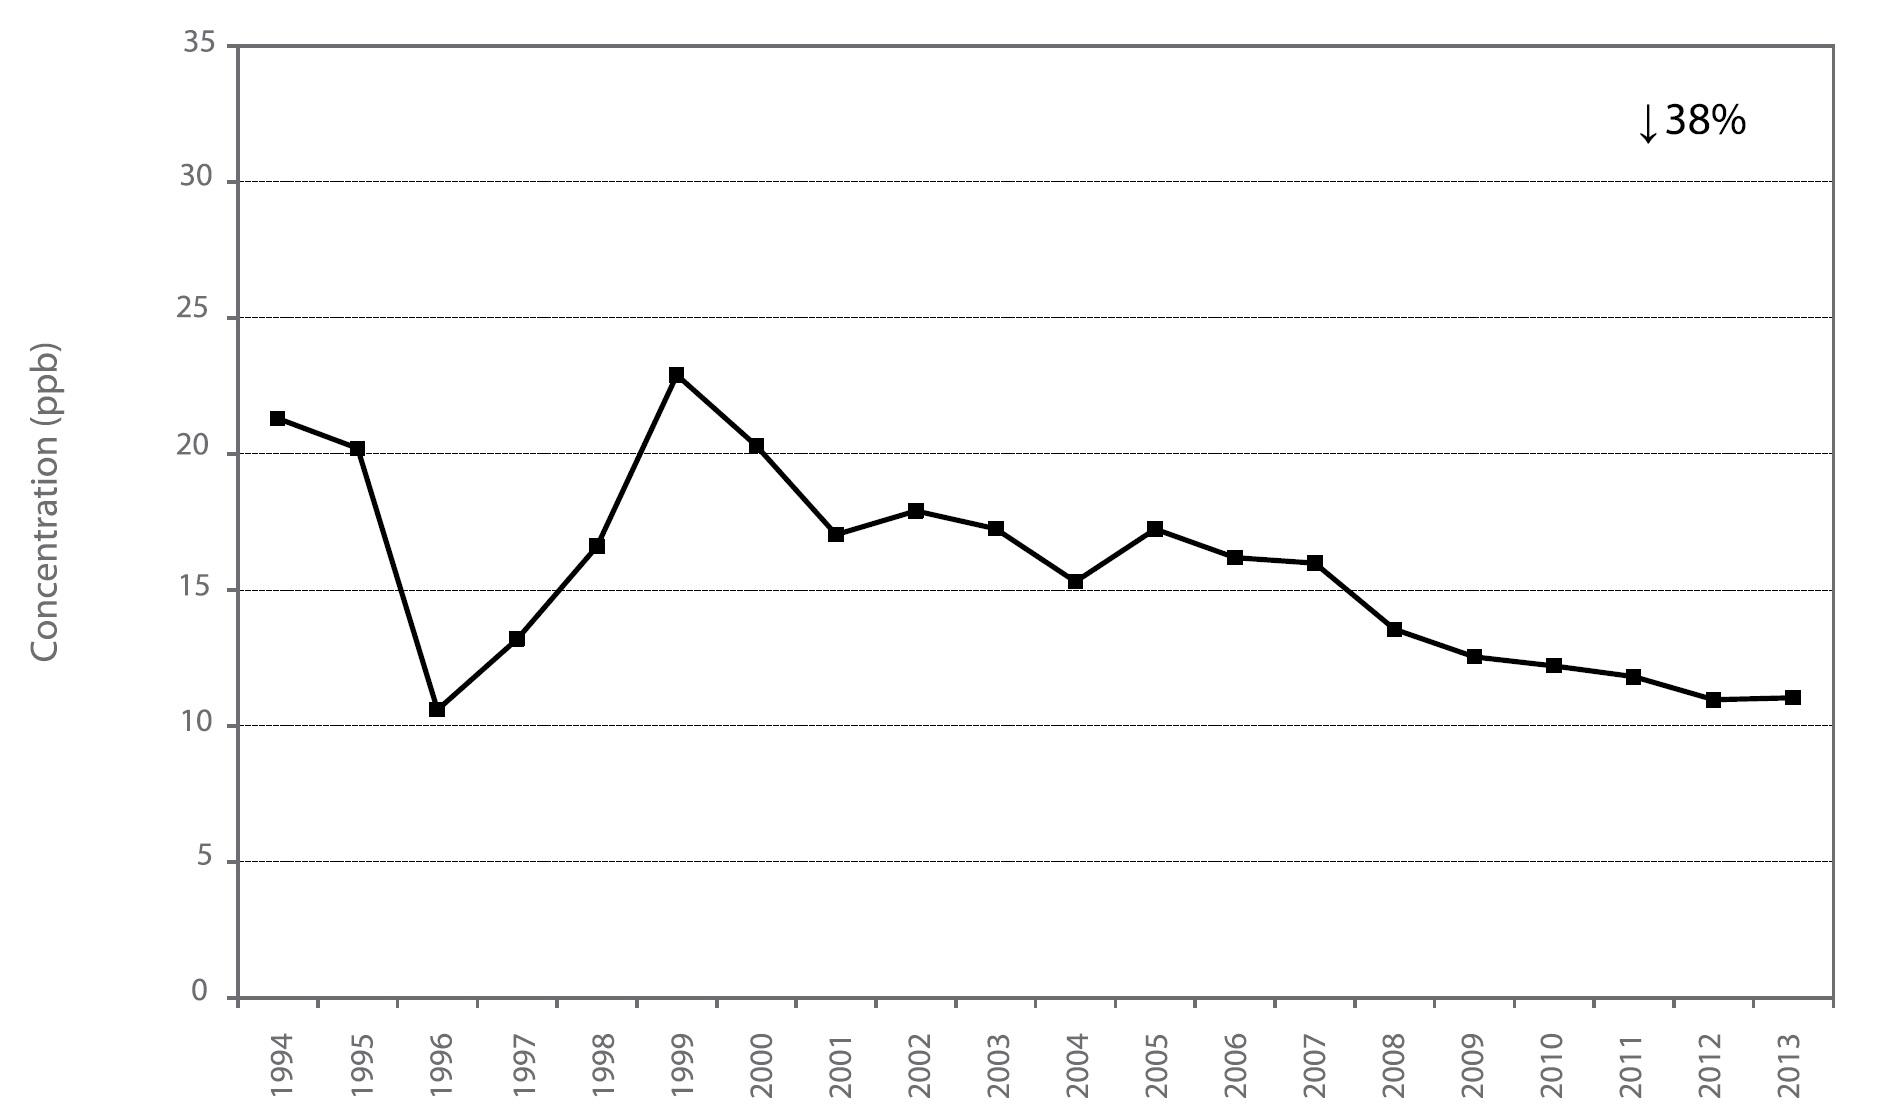 Figure A37 is a line chart displaying the nitrogen dioxide annual mean at Burlington from 1994 to 2013. Over this 20-year period, nitrogen dioxide decreased 38%.